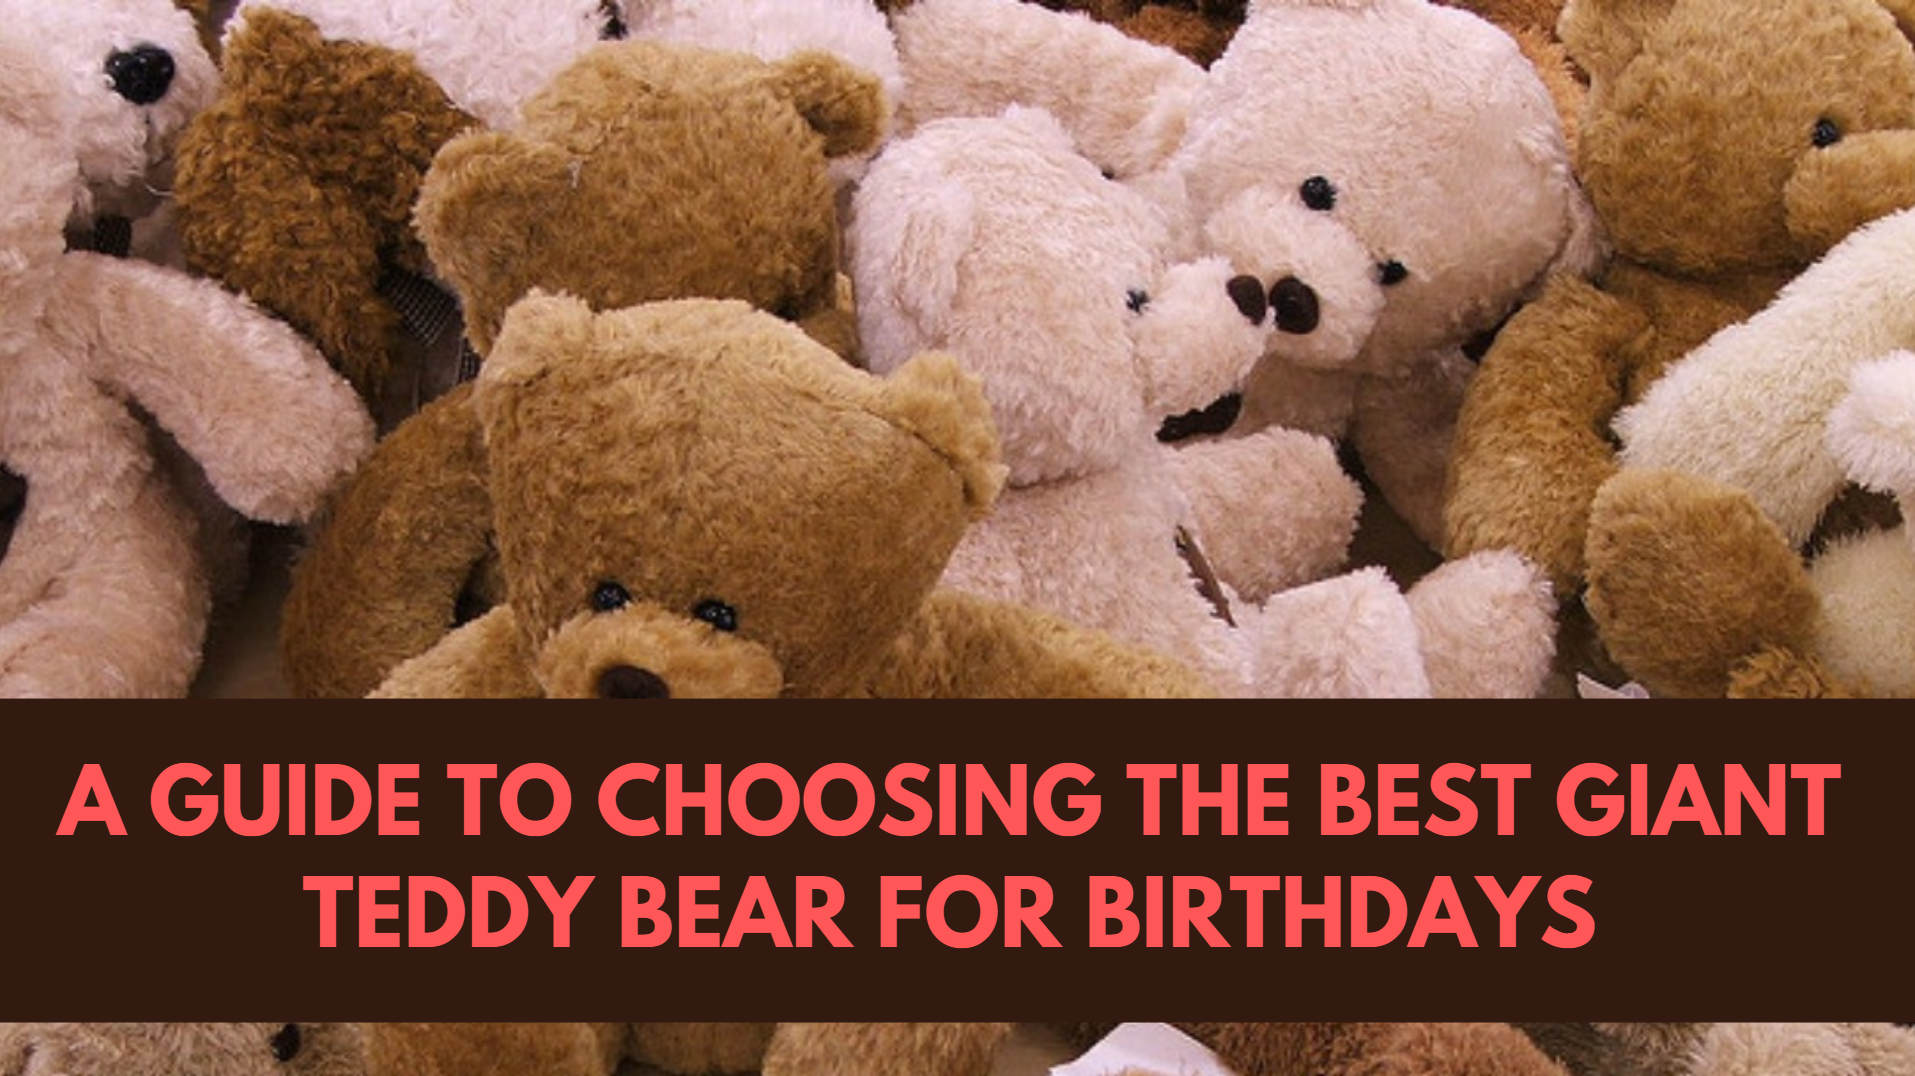 Guide to Choosing the Best Giant Teddy Bear for Birthdays